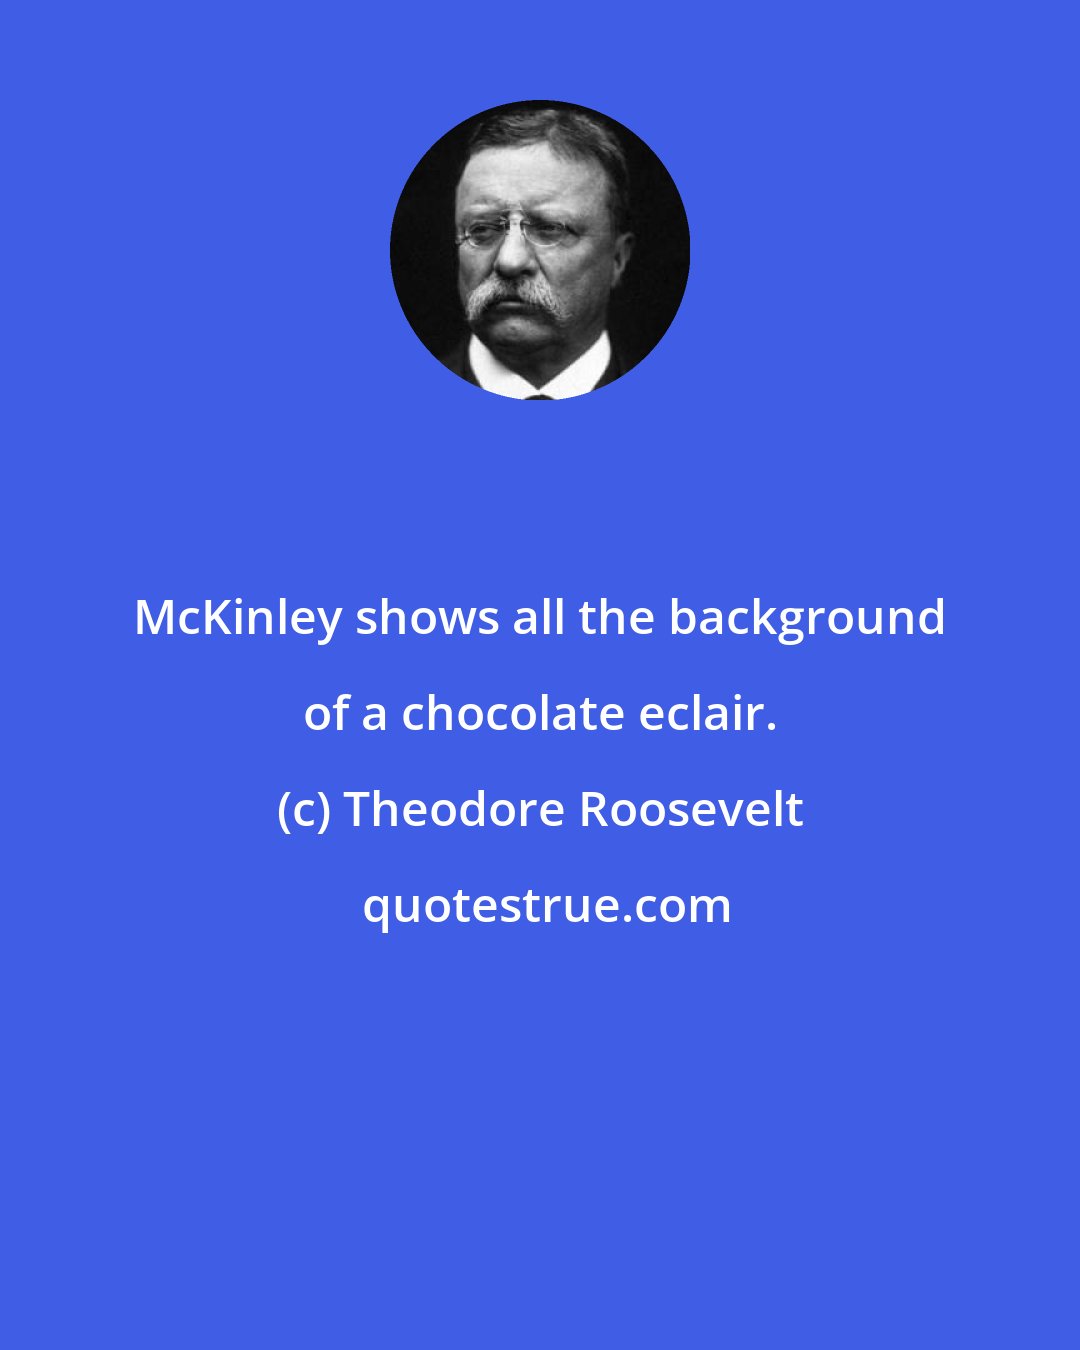 Theodore Roosevelt: McKinley shows all the background of a chocolate eclair.